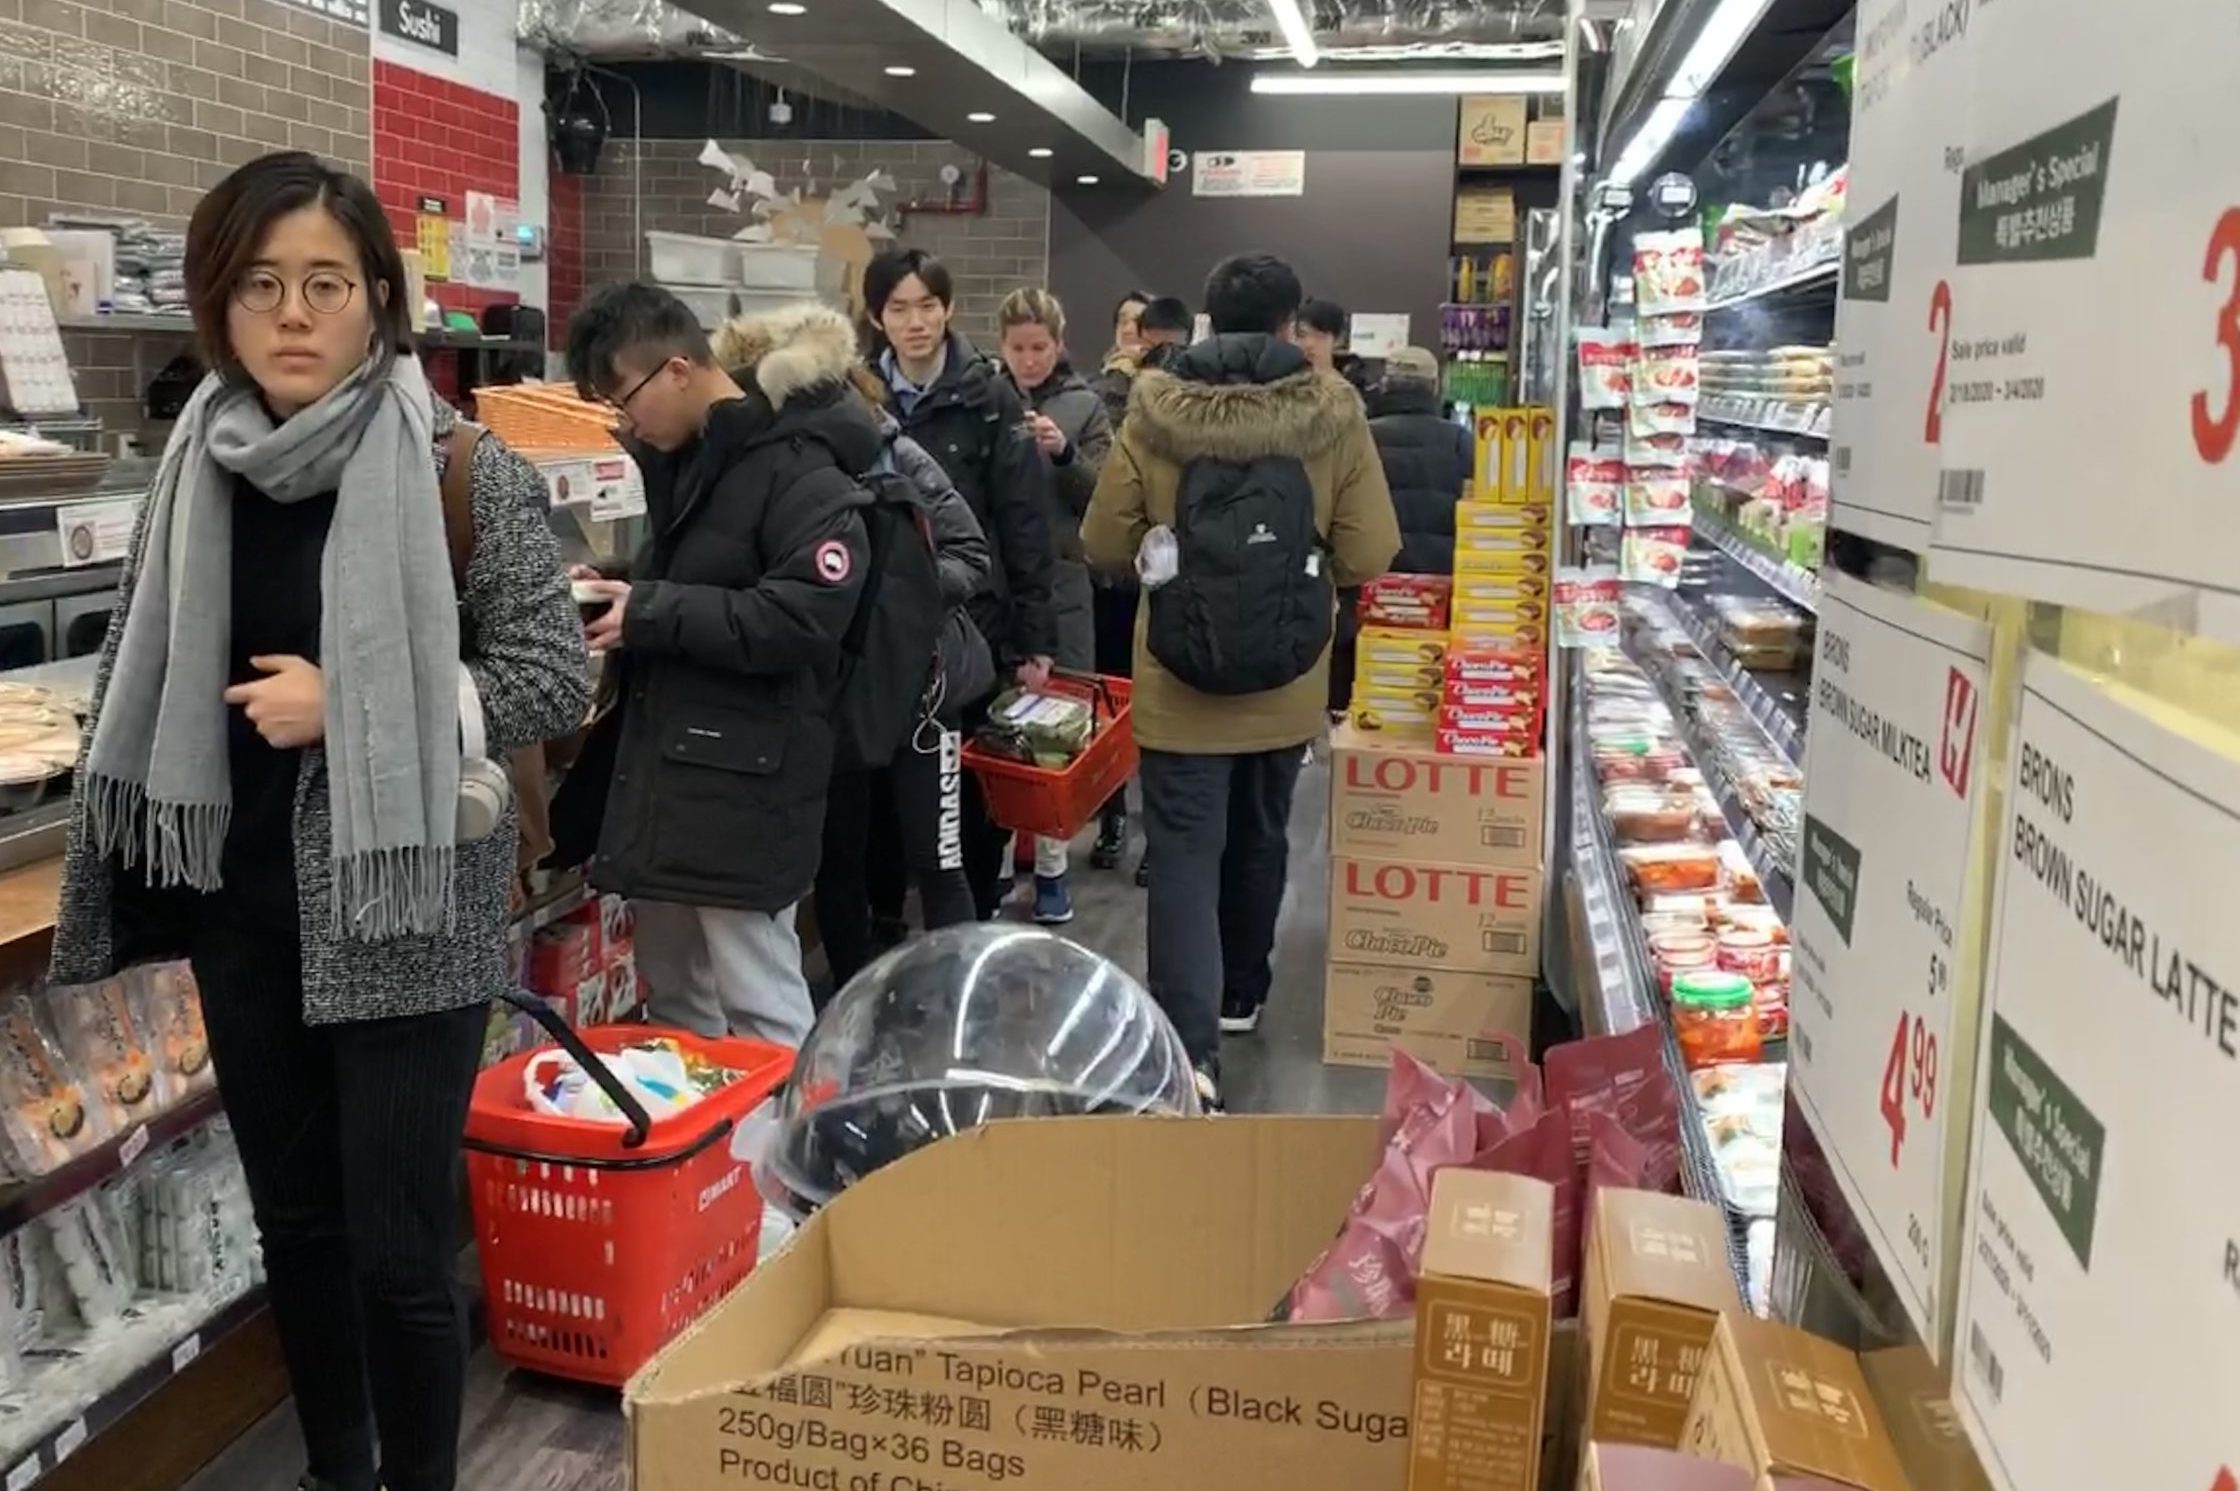 People lined up to checkout at H Mart of Morningside Heights on Sunday night. / Photo by Yuntong Man